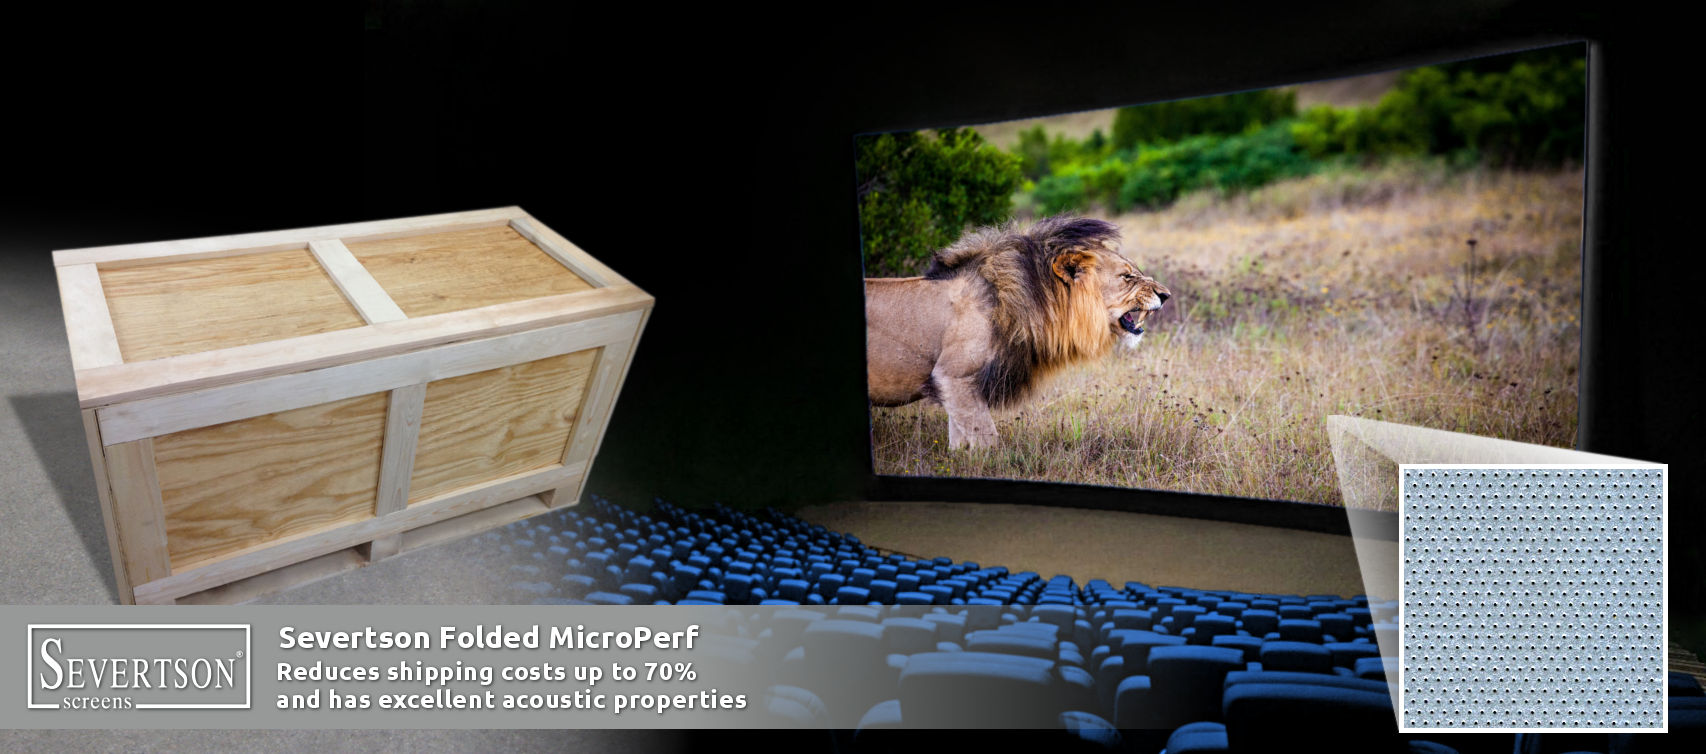 Severtson's Folded MicroPerf screens make shipping easier, reducing shipping costs by up to 70 percent.